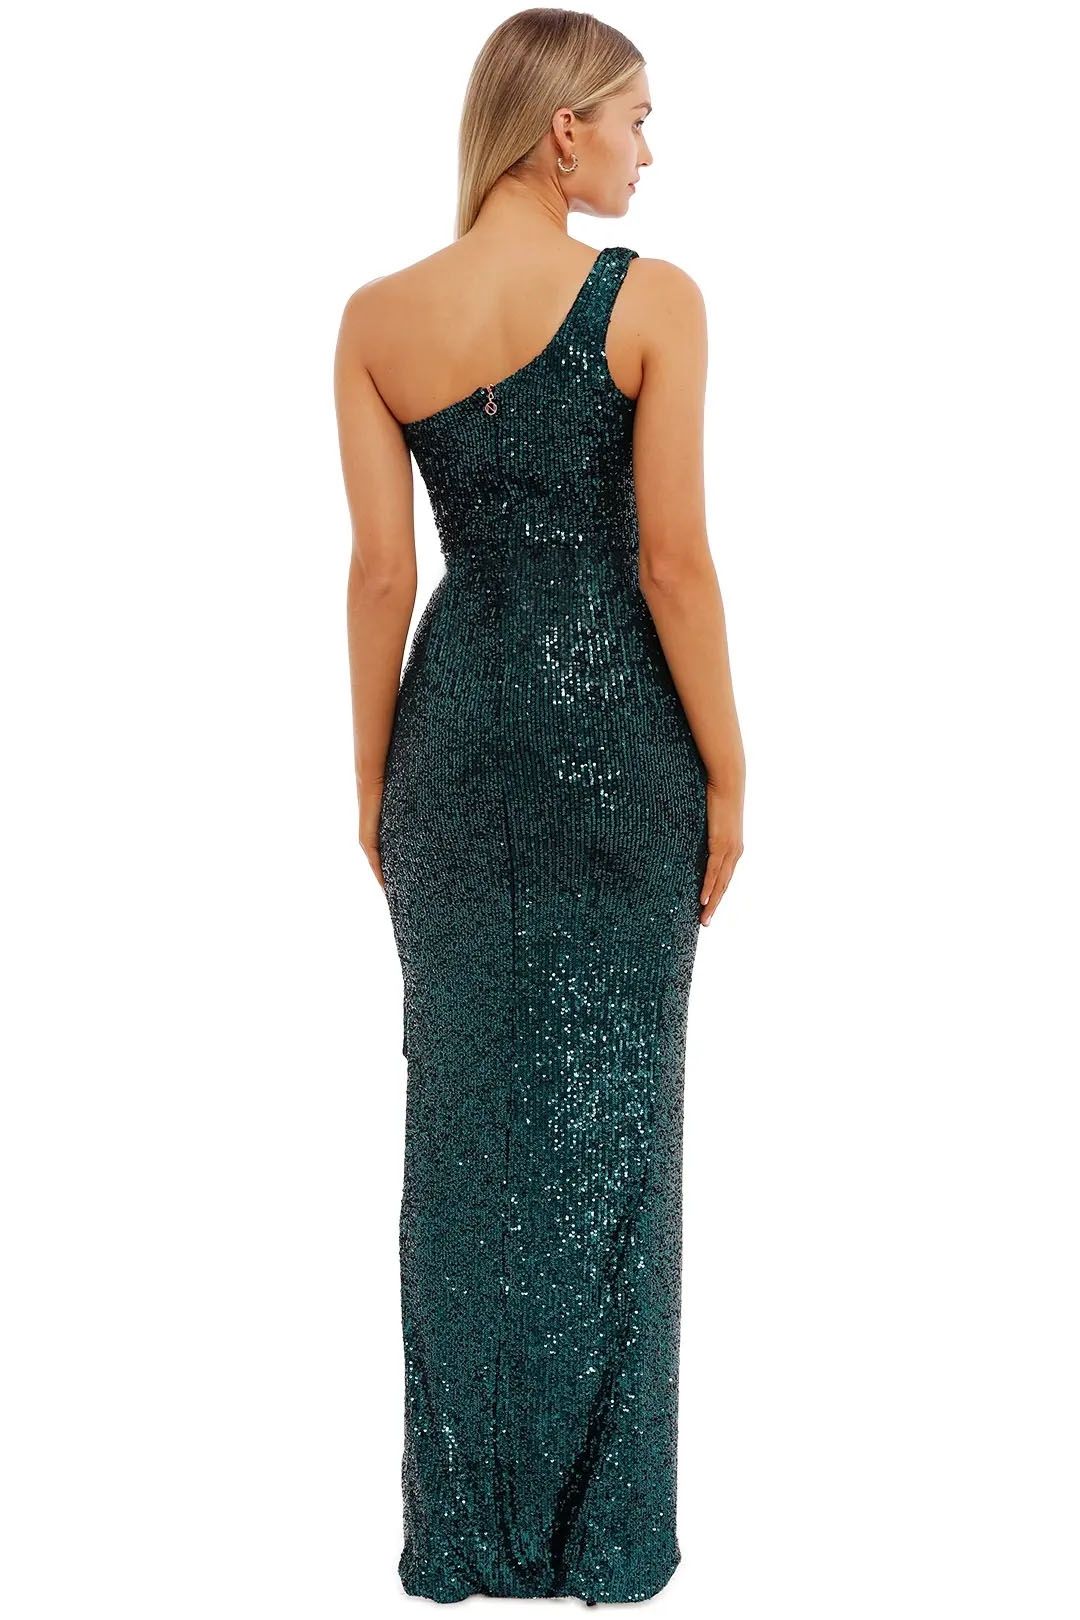 Nookie Palazzo Gown Teal One Shoulder Bodycon